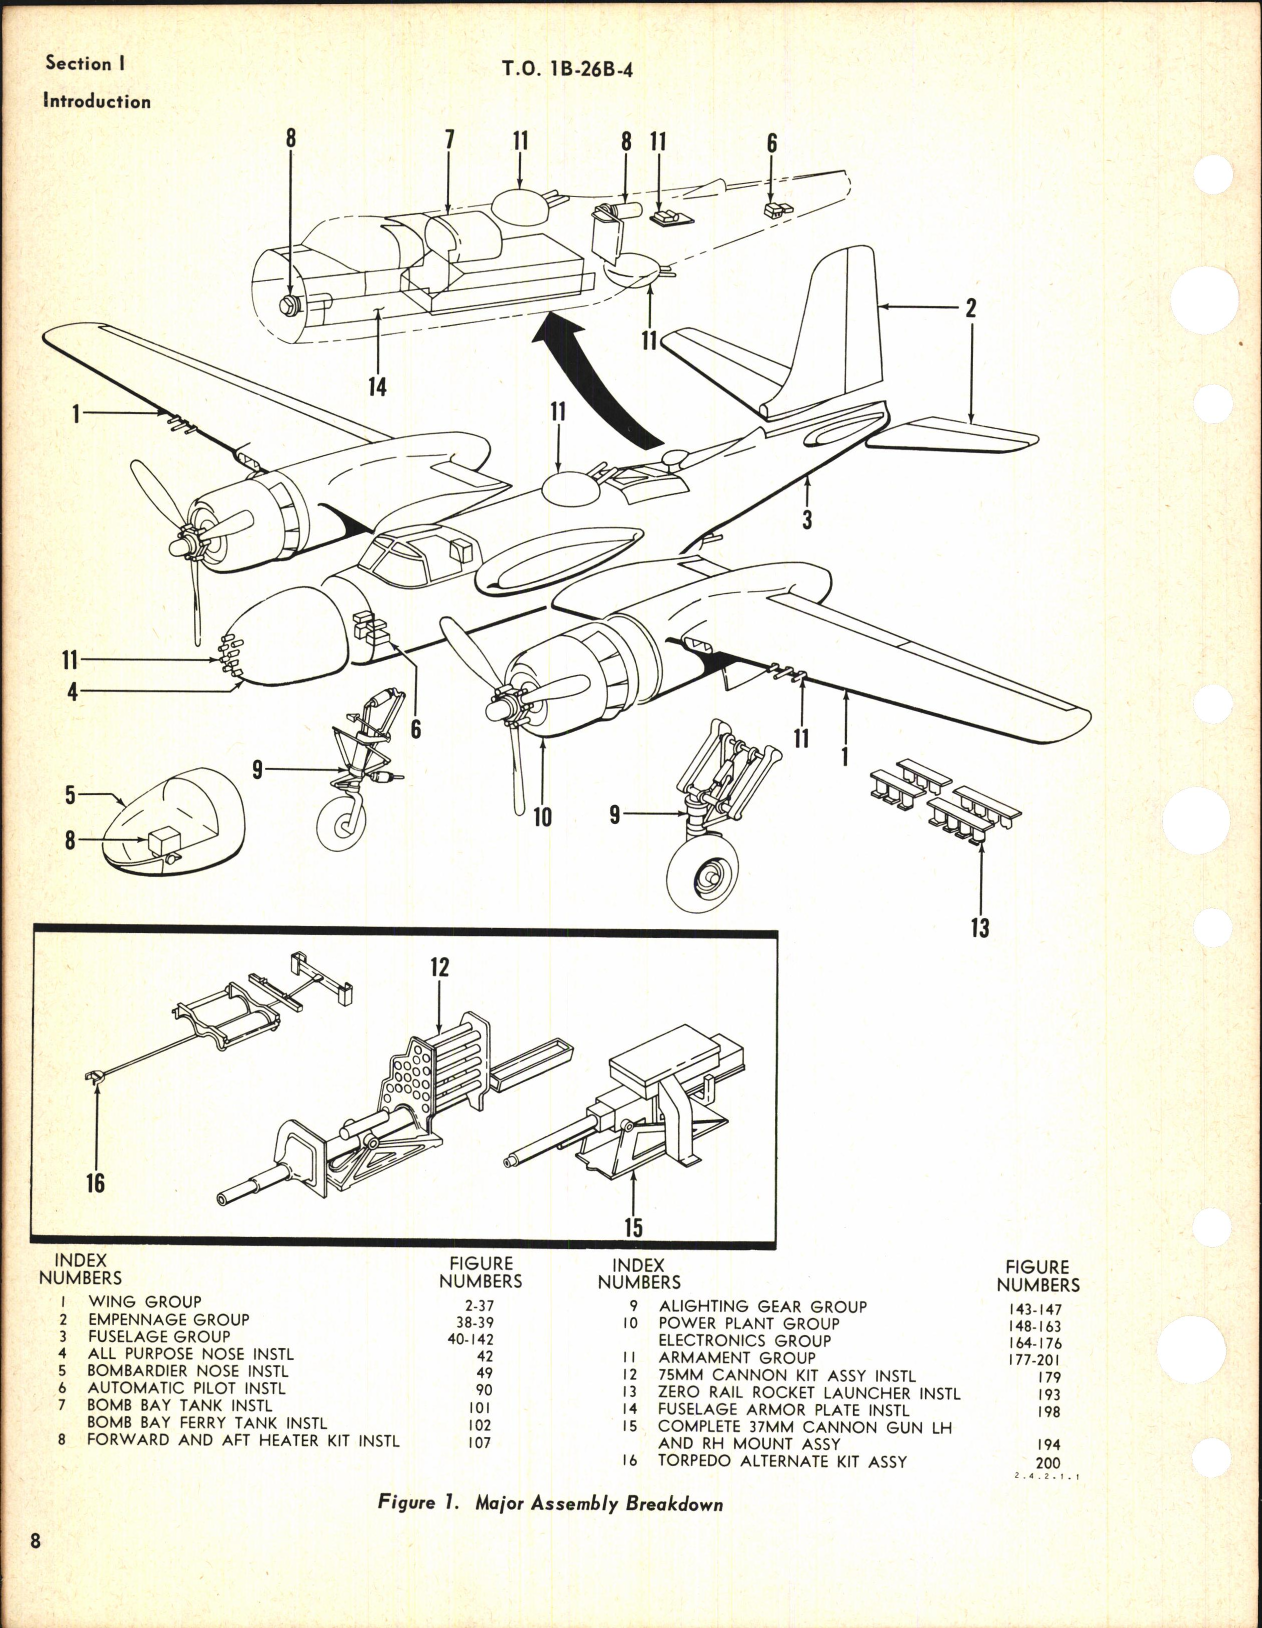 Sample page 16 from AirCorps Library document: Illustrated Parts Breakdown for B-26B, B-26C, TB-26B, TB-26C, RB-26C, and JD-1 Aircraft